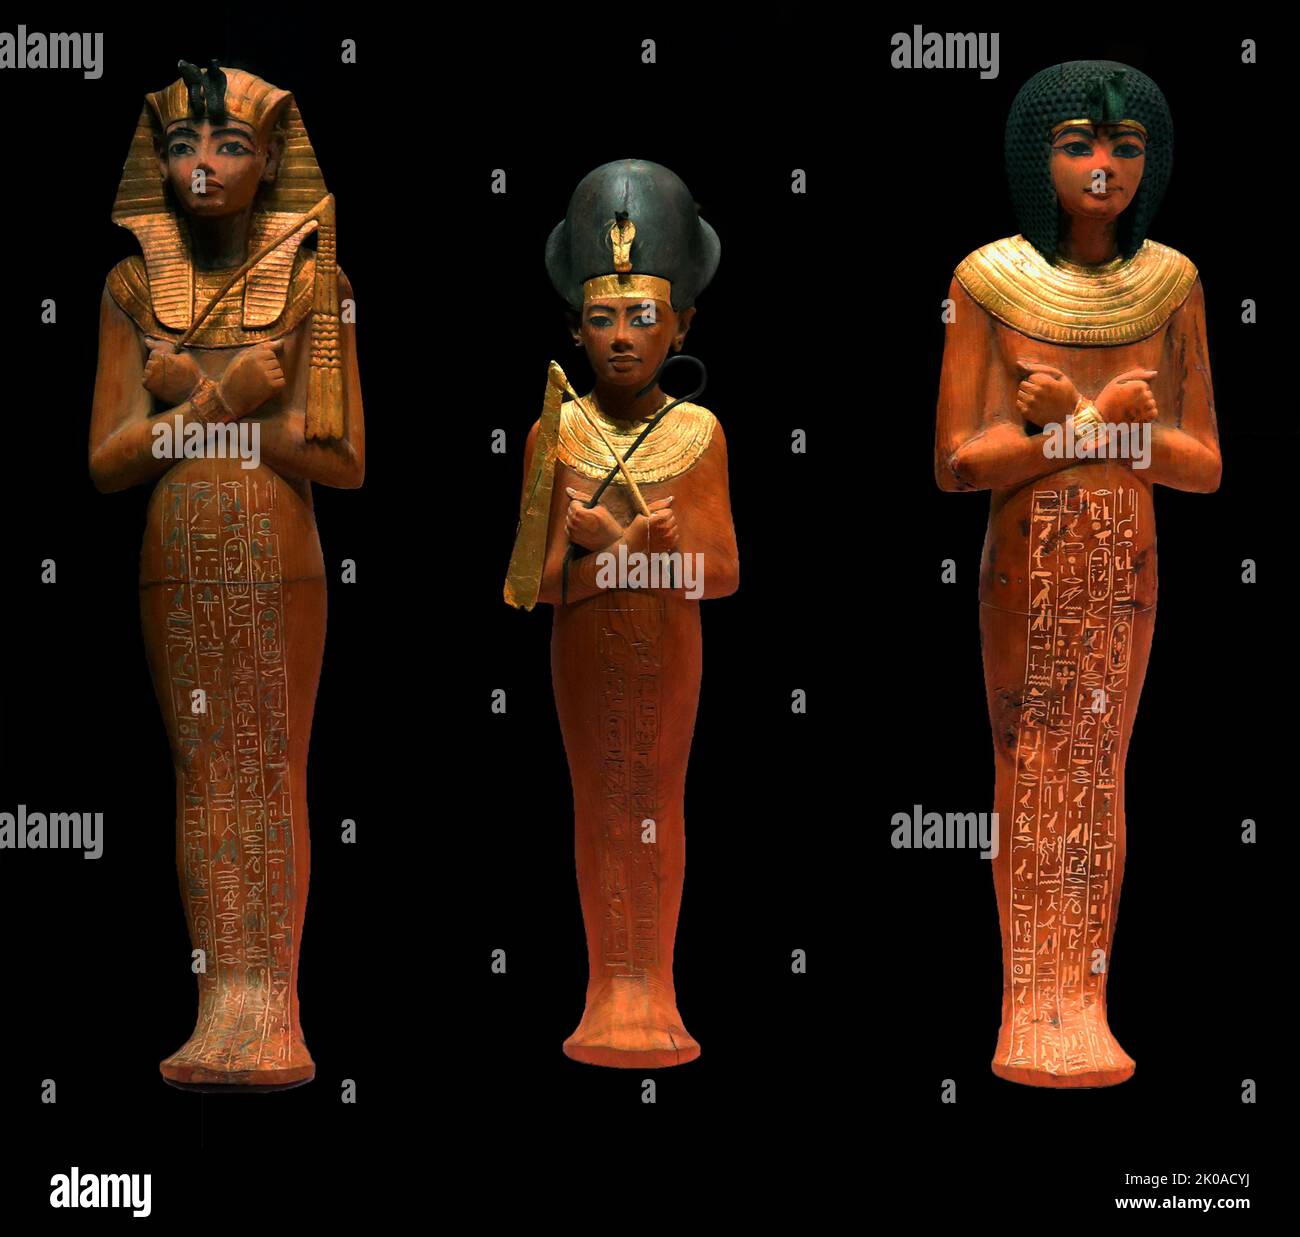 Ancient Egyptian, gilded wood, funerary figurines. Left to right: King Tutankhamun wearing a Nubian wig, King Tutankhamun wearing the blue crown (Khepresh); King Tutankhamun wearing the 'Nemes' Headdress. 1326 BC. Tomb relics from the king's tomb Stock Photo